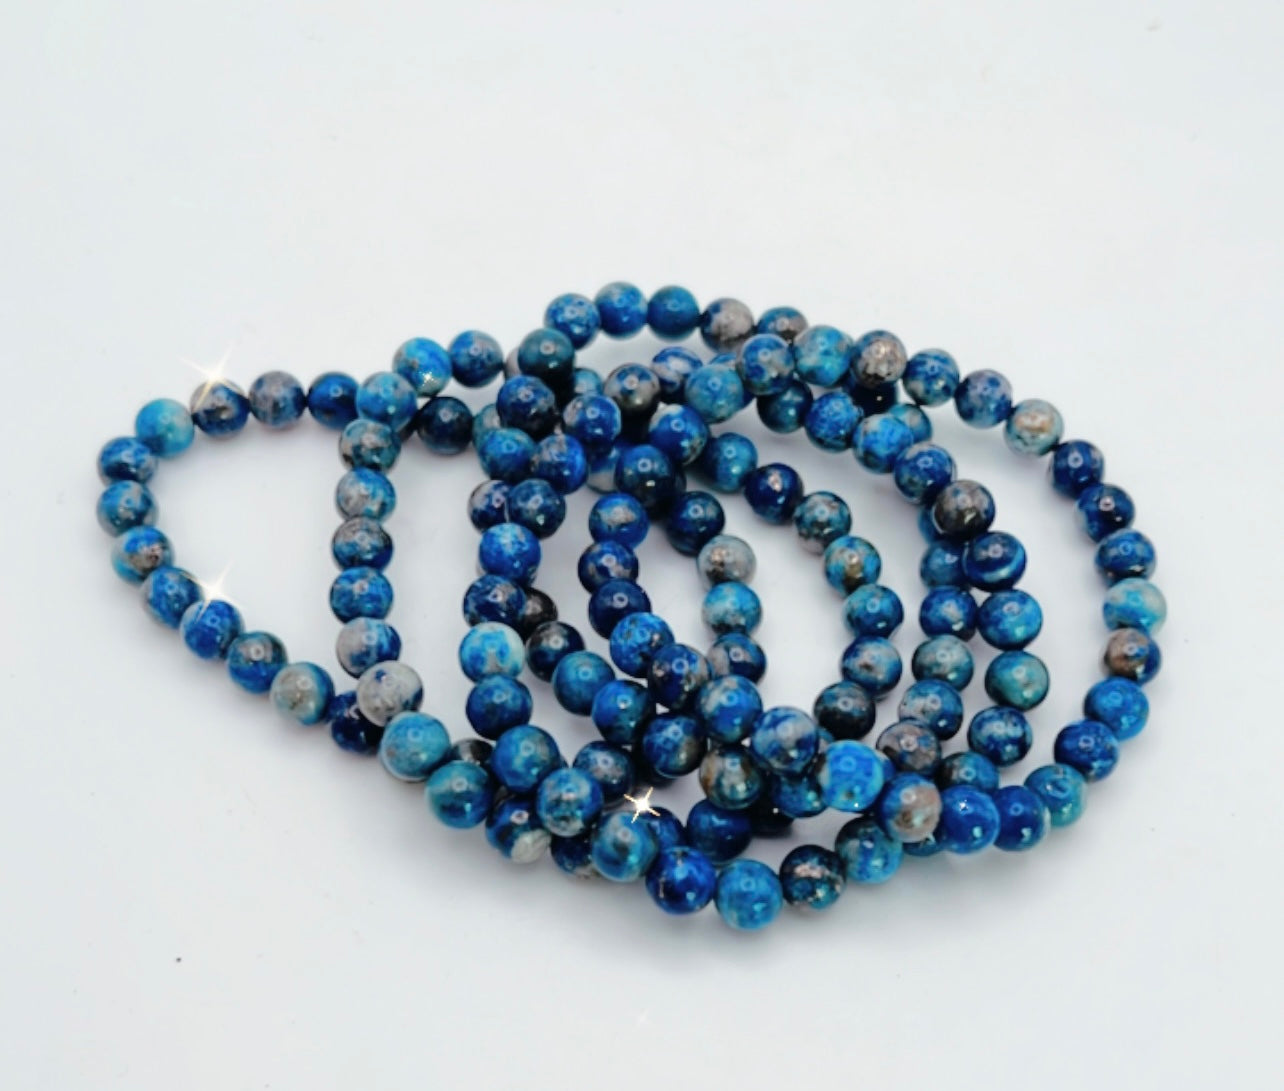 LAPIS LAZULI- migraines, thyroid issues, clearing emotional baggage, autism/ADD/ADHD